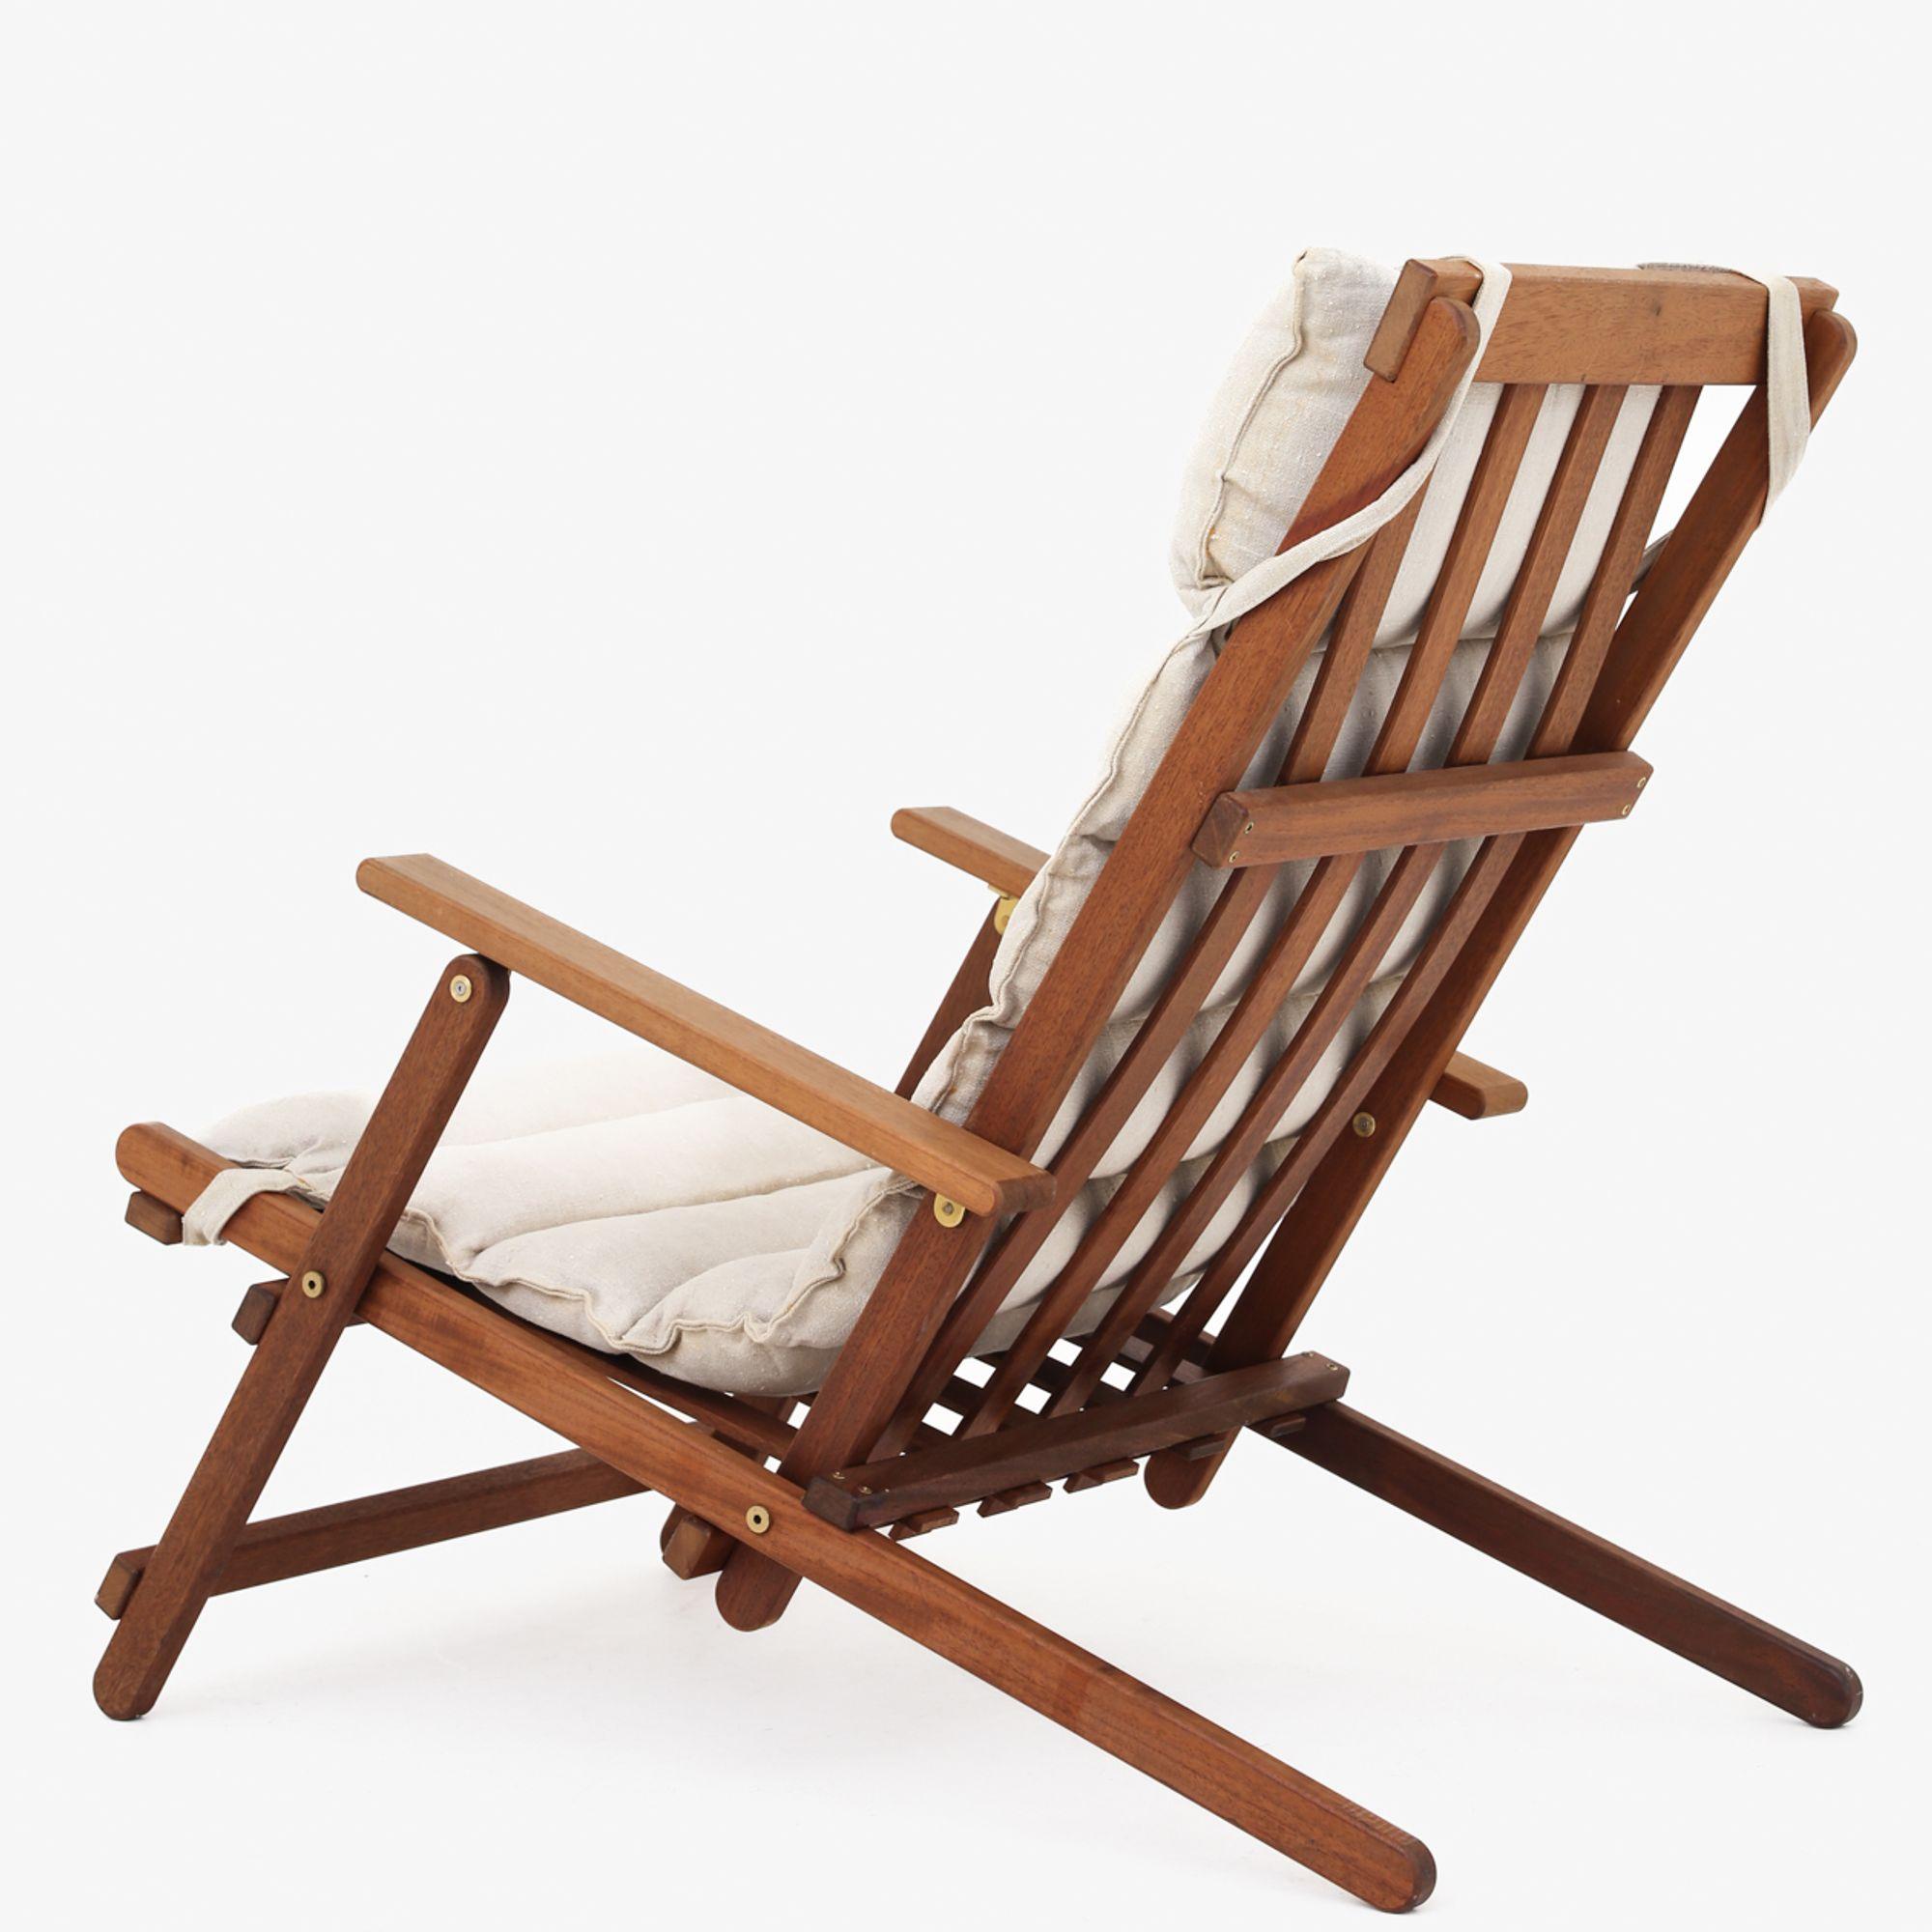 Deck chair with mahogany frame and washed canvas cushion. Designed in 1968. Børge Mogensen / Søborg Møbler.